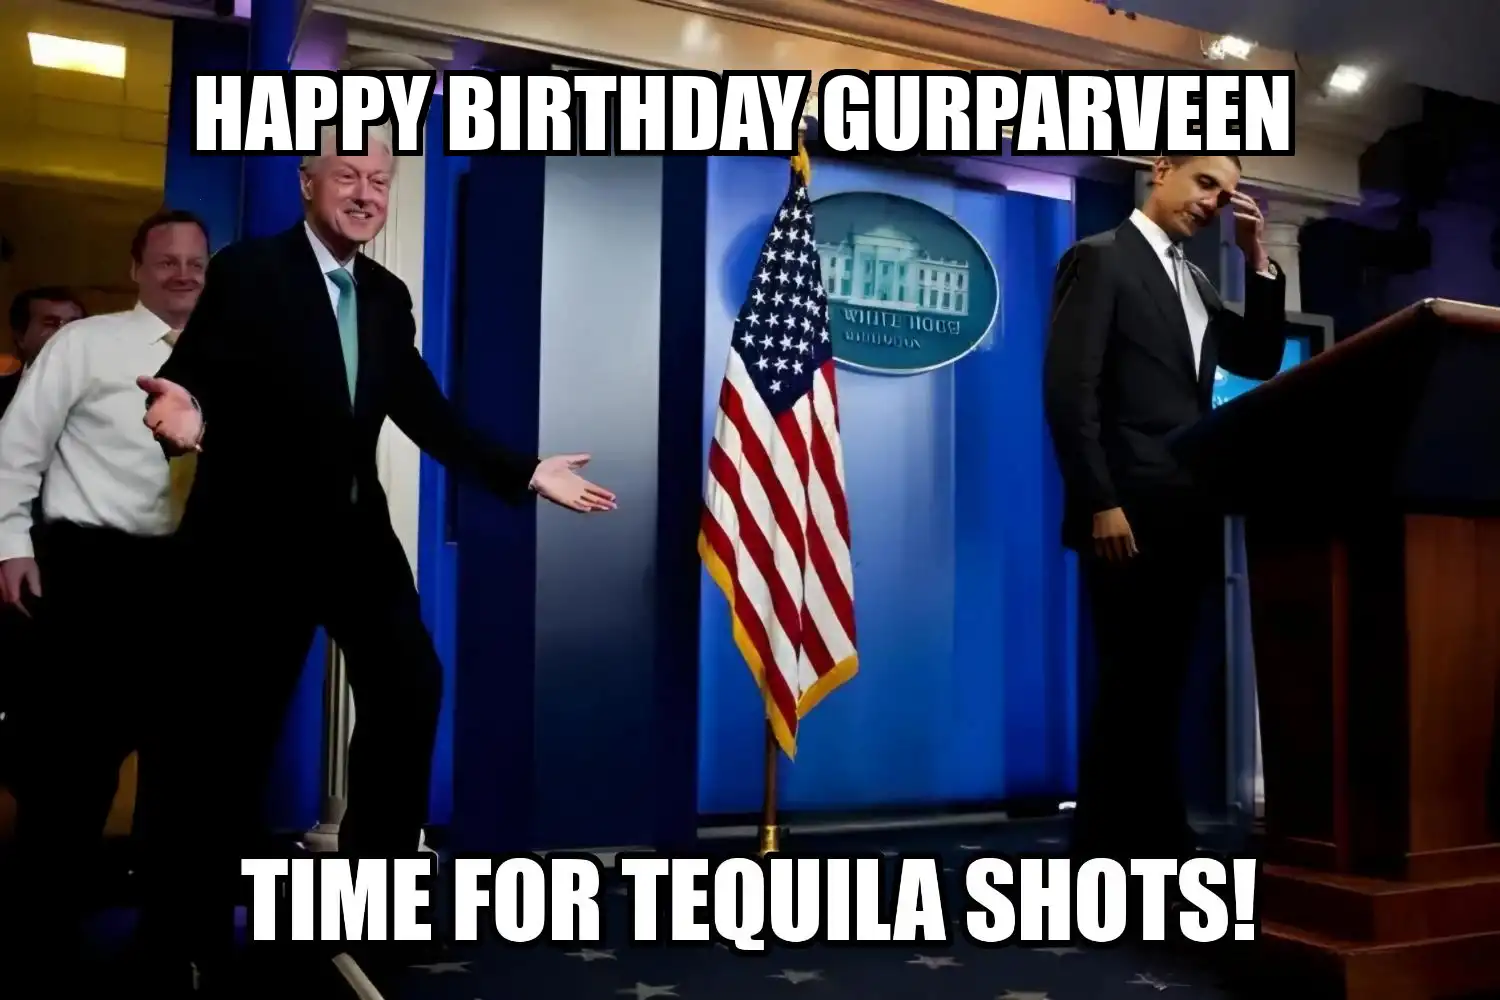 Happy Birthday Gurparveen Time For Tequila Shots Memes